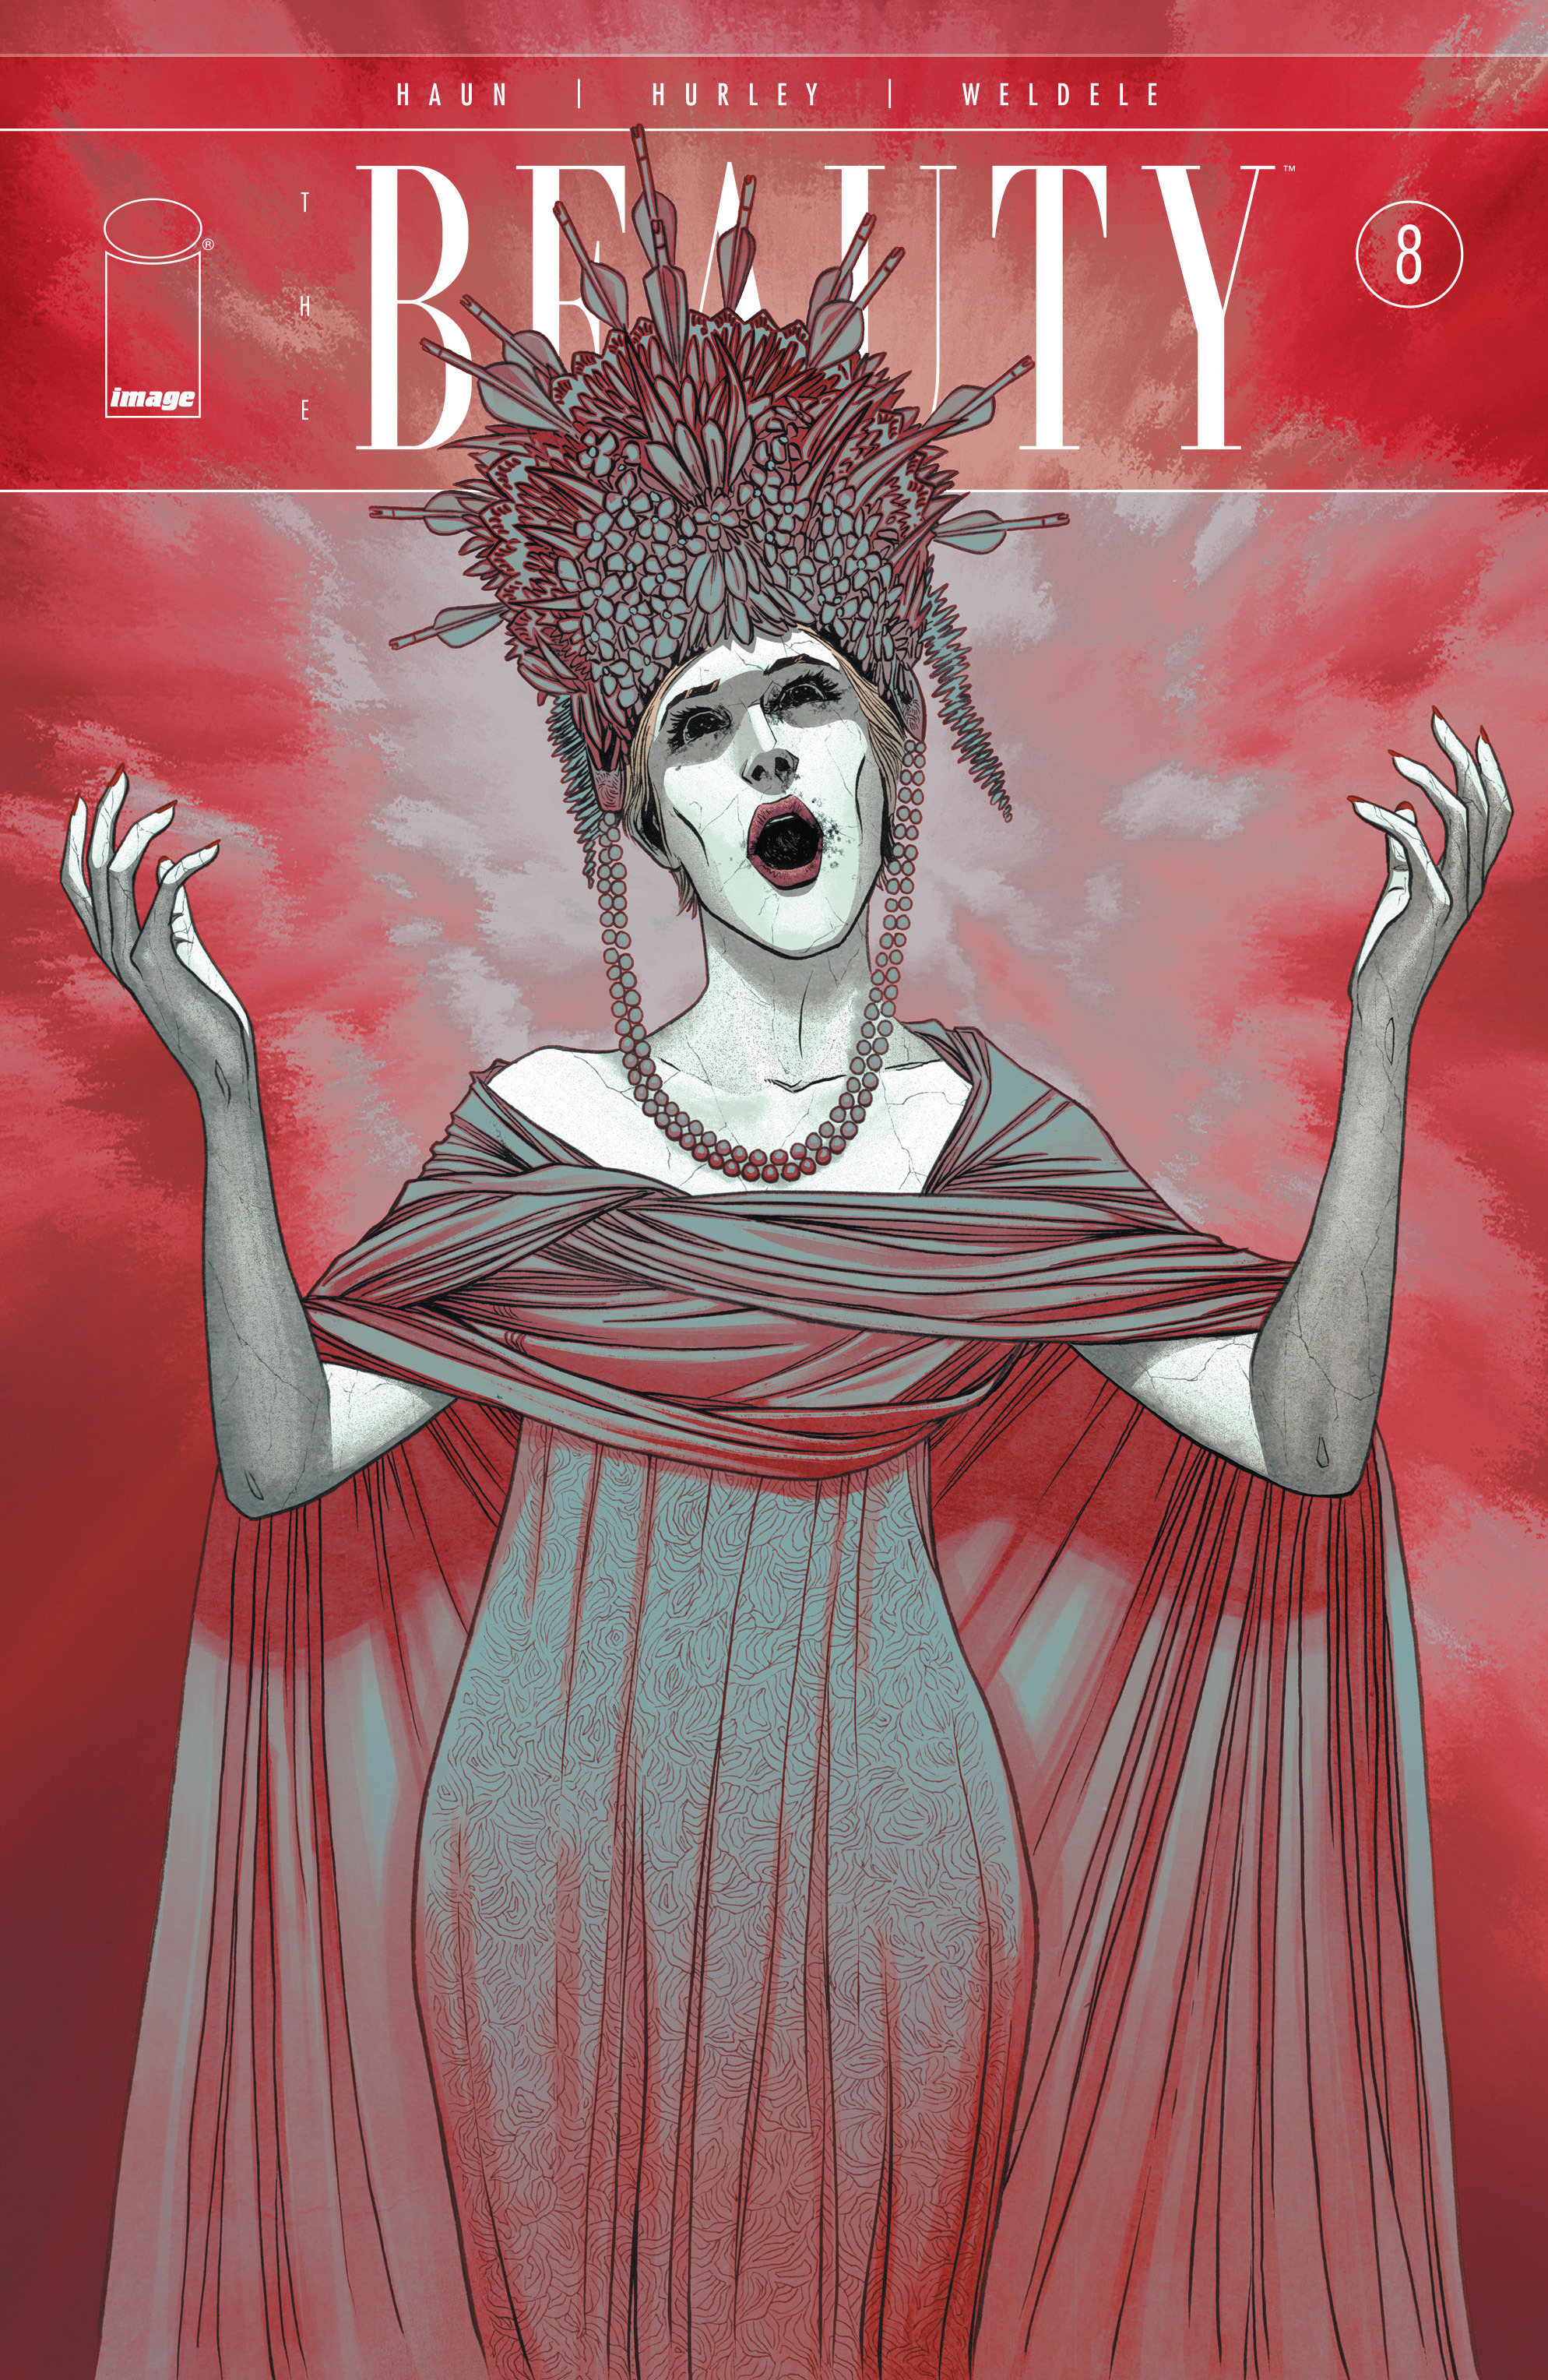 Read online The Beauty comic -  Issue #8 - 1